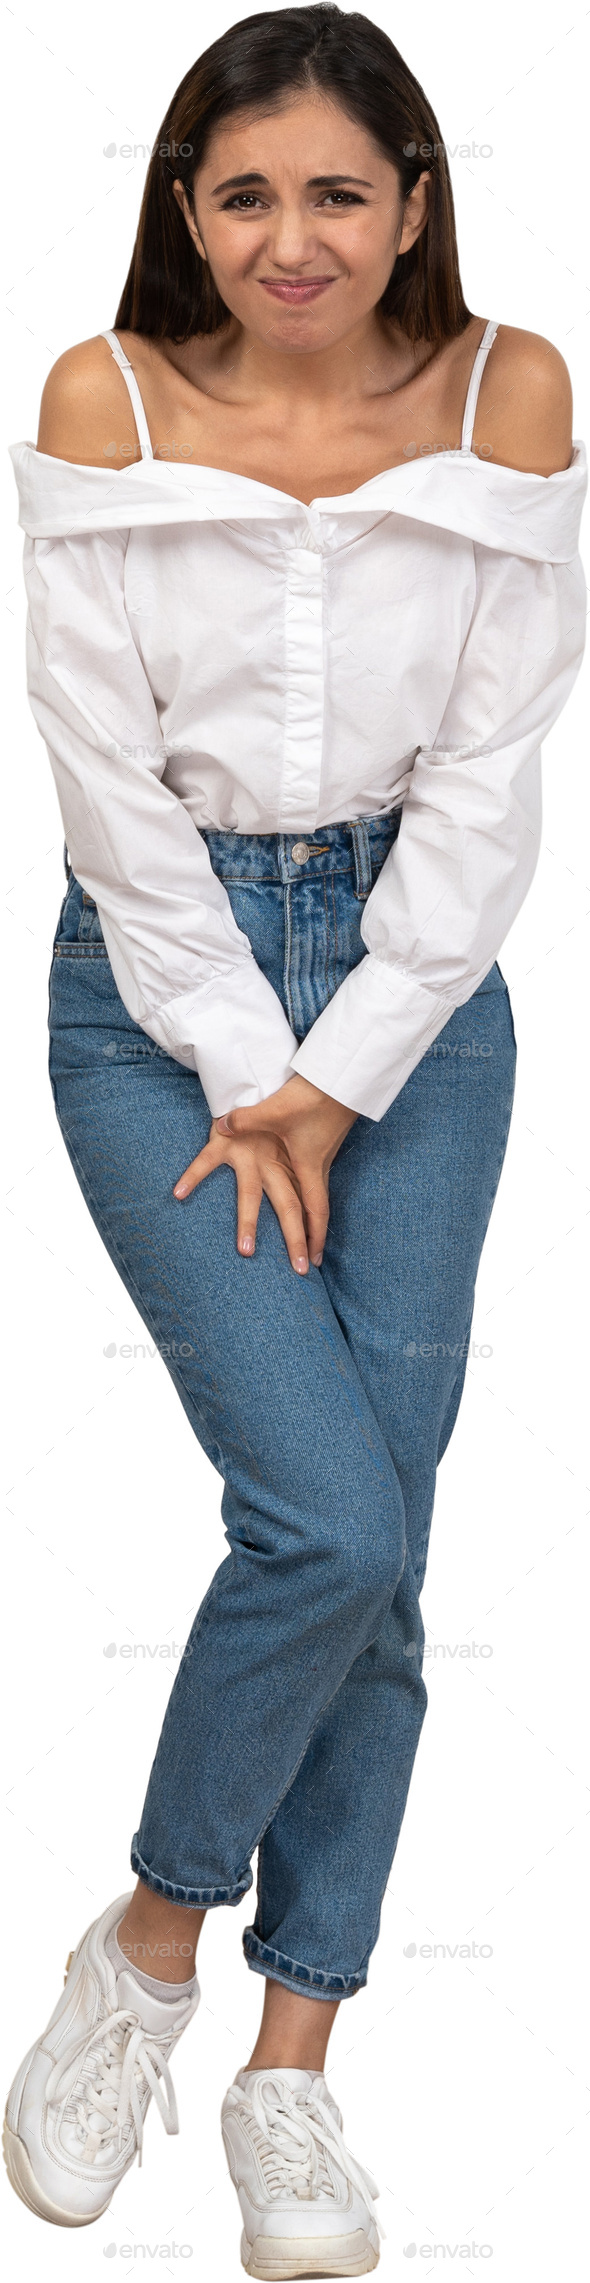 a woman wearing blue jeans and a white off the shoulder shirt